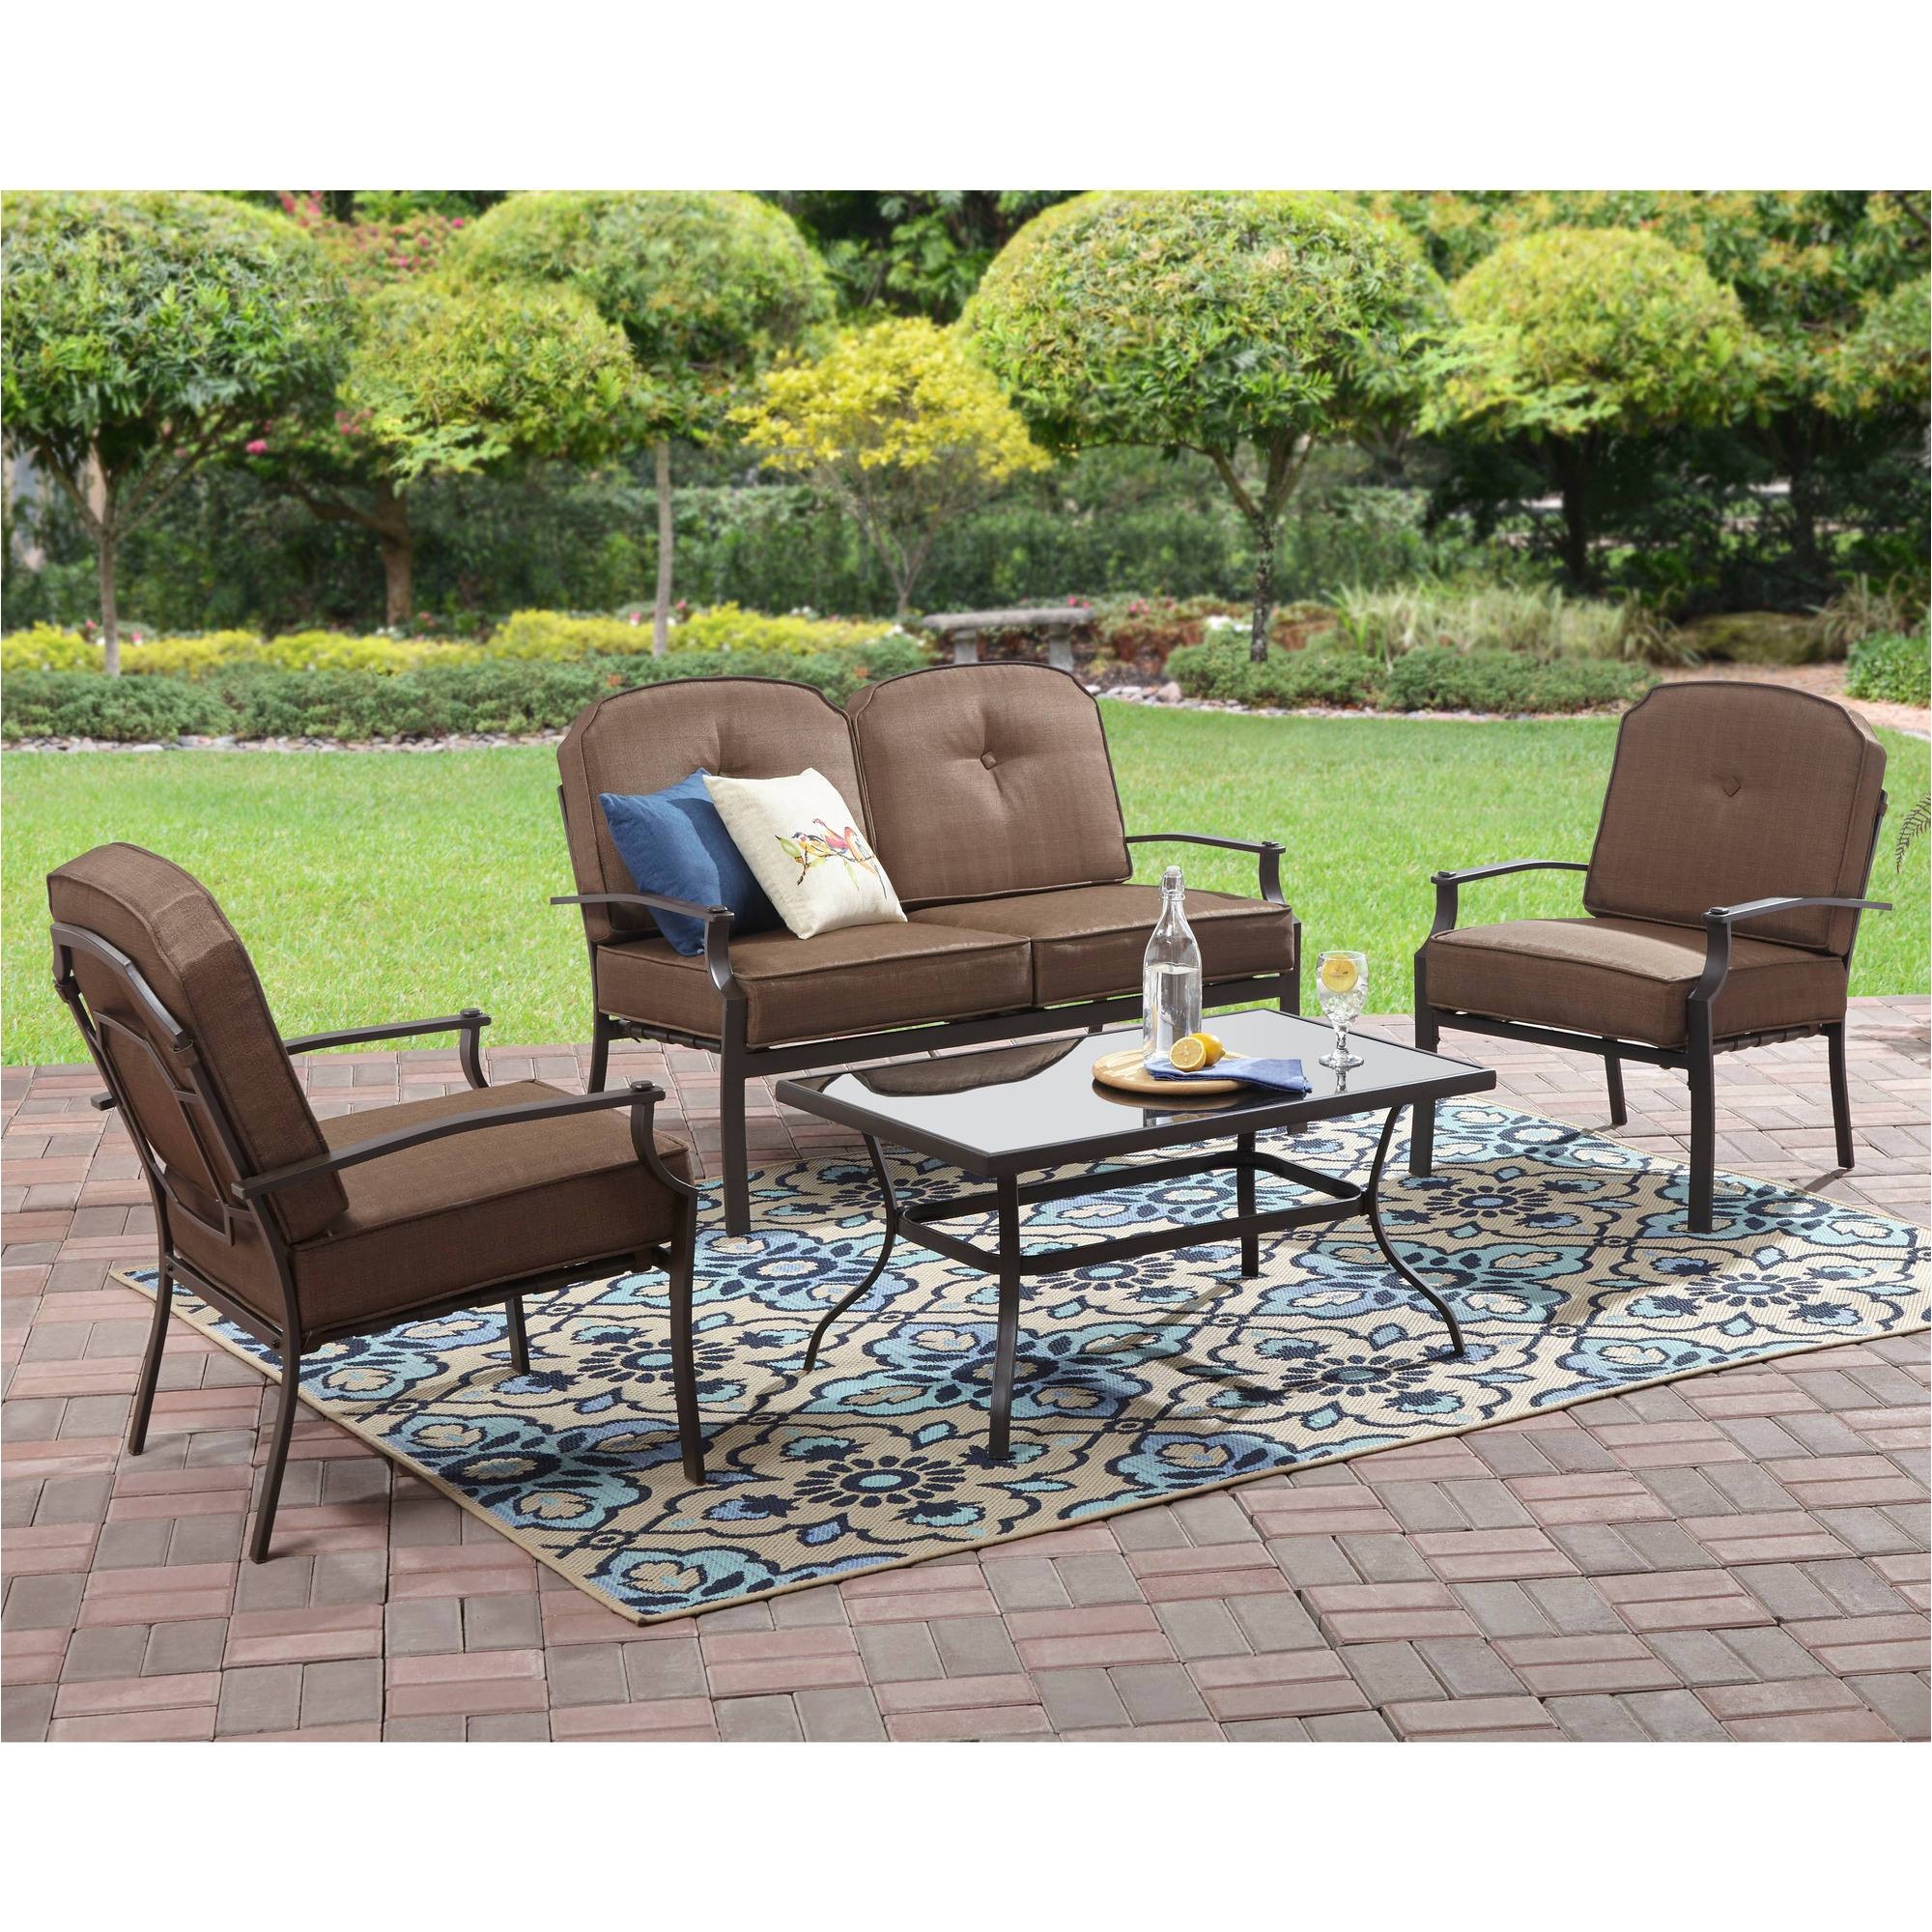 big lots patio sets best best big lots furniture prices design wrought iron patio furniture